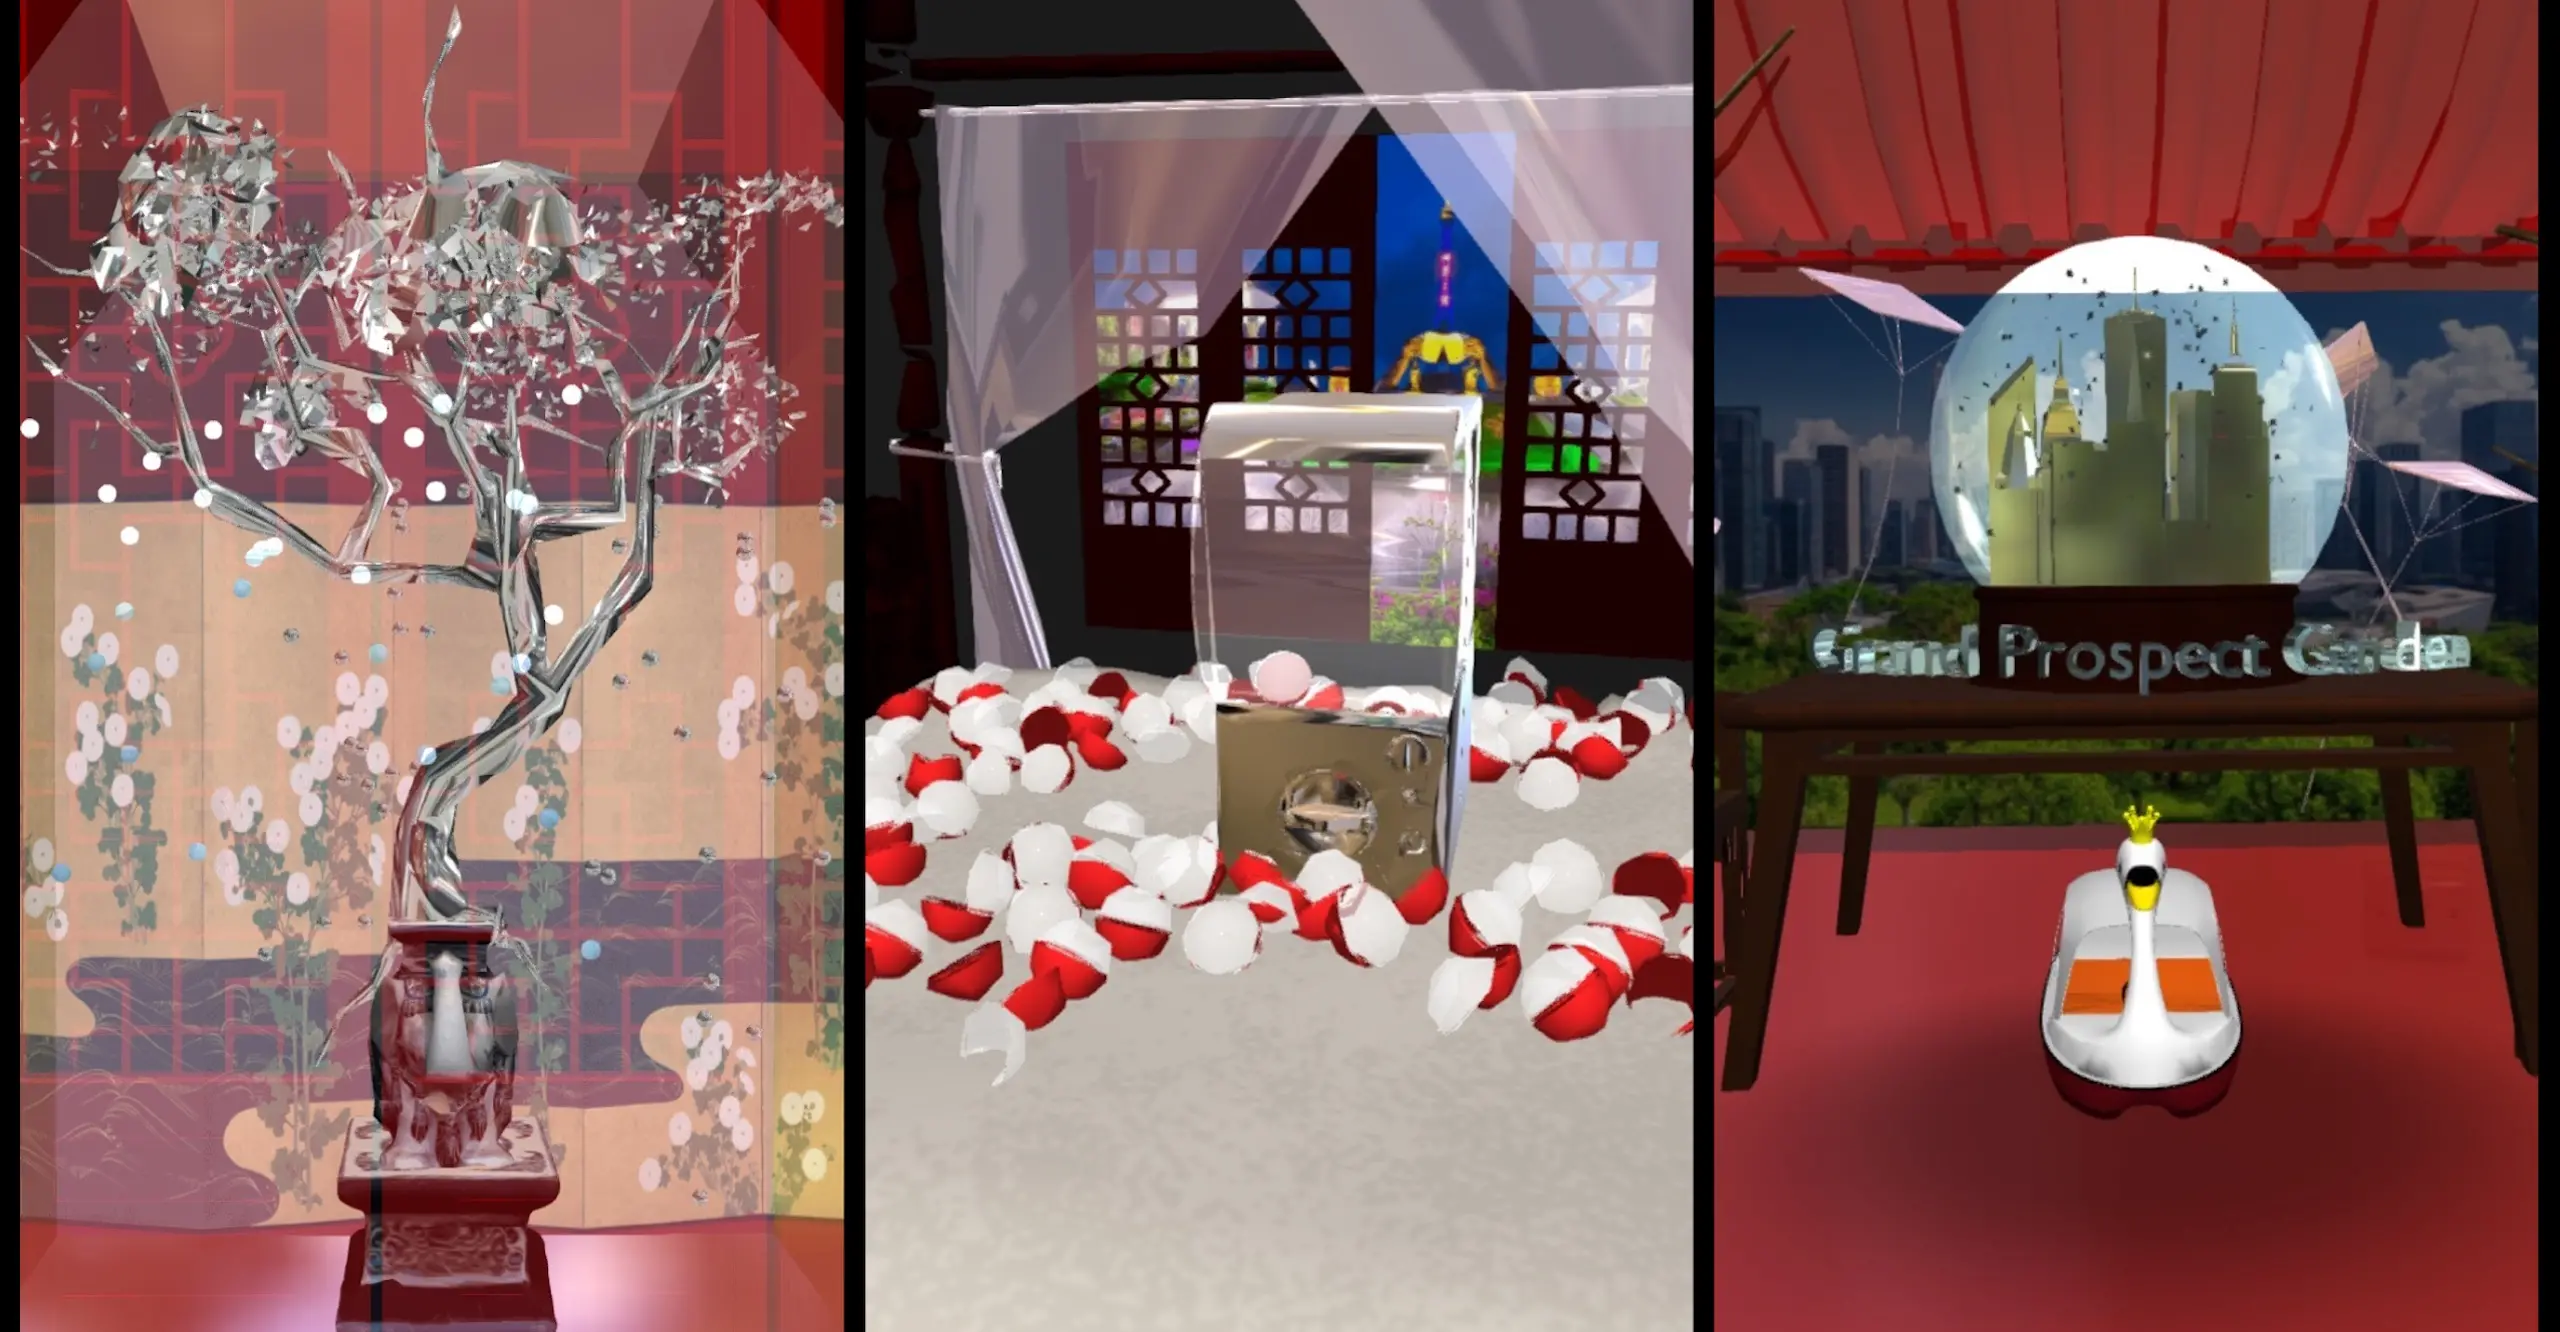 Three computer generated images side by side, from left to right - a delicately limbed tree with metalic blossoms; the interior of a bright room with red & white spheres scattered on the floor; and a snowglobe with a city landscape perched on a table in front of a window with a cityscape beyond.